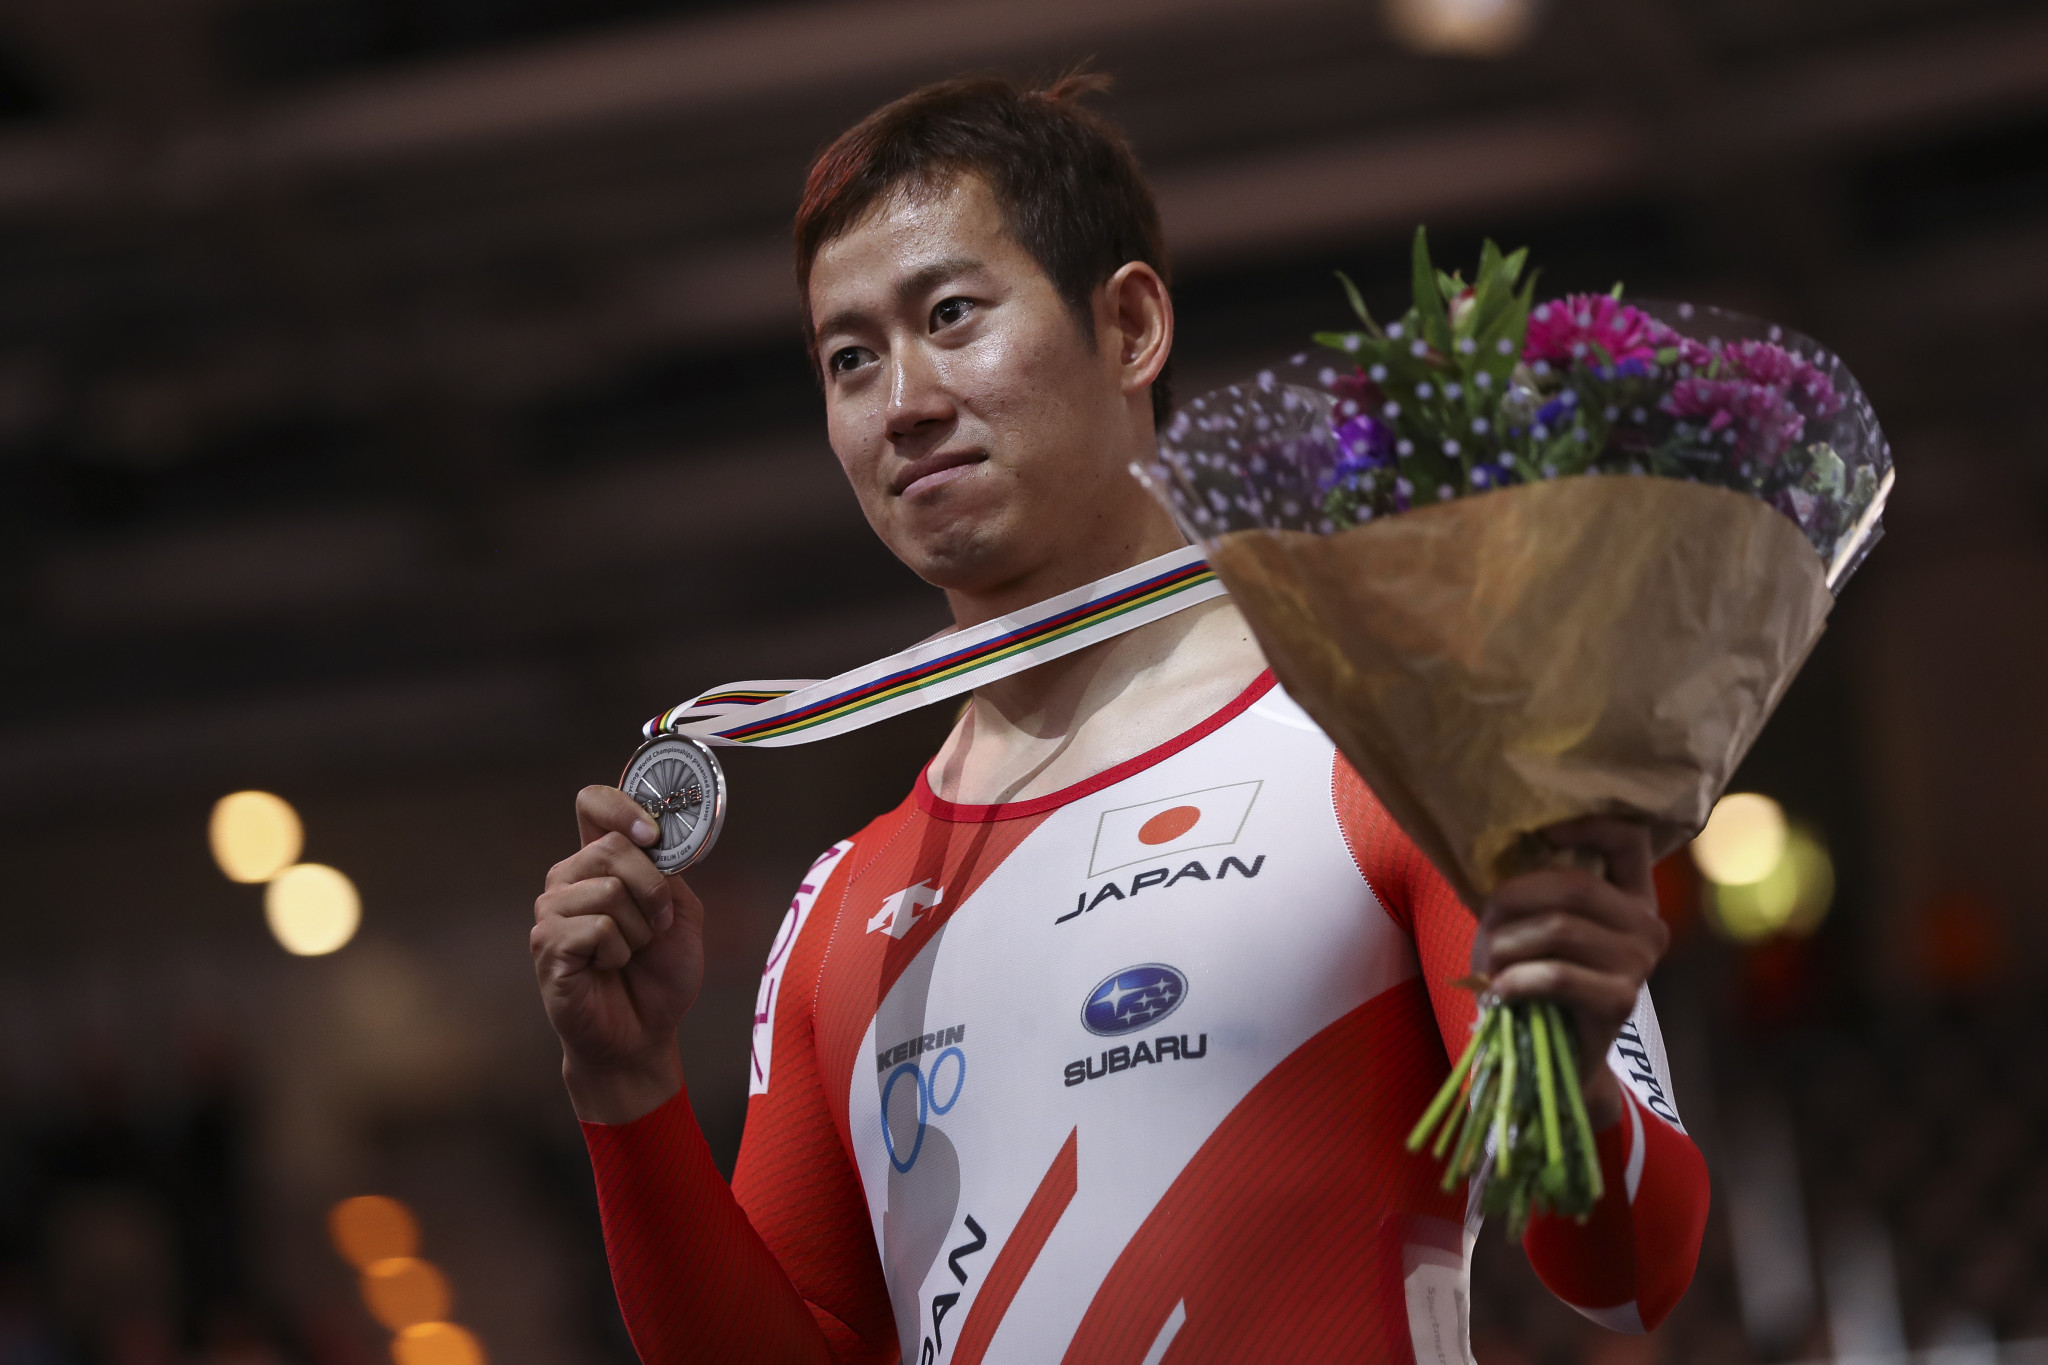 Yuta Wakimoto is one of the favourites in the men's keirin ©Getty Images